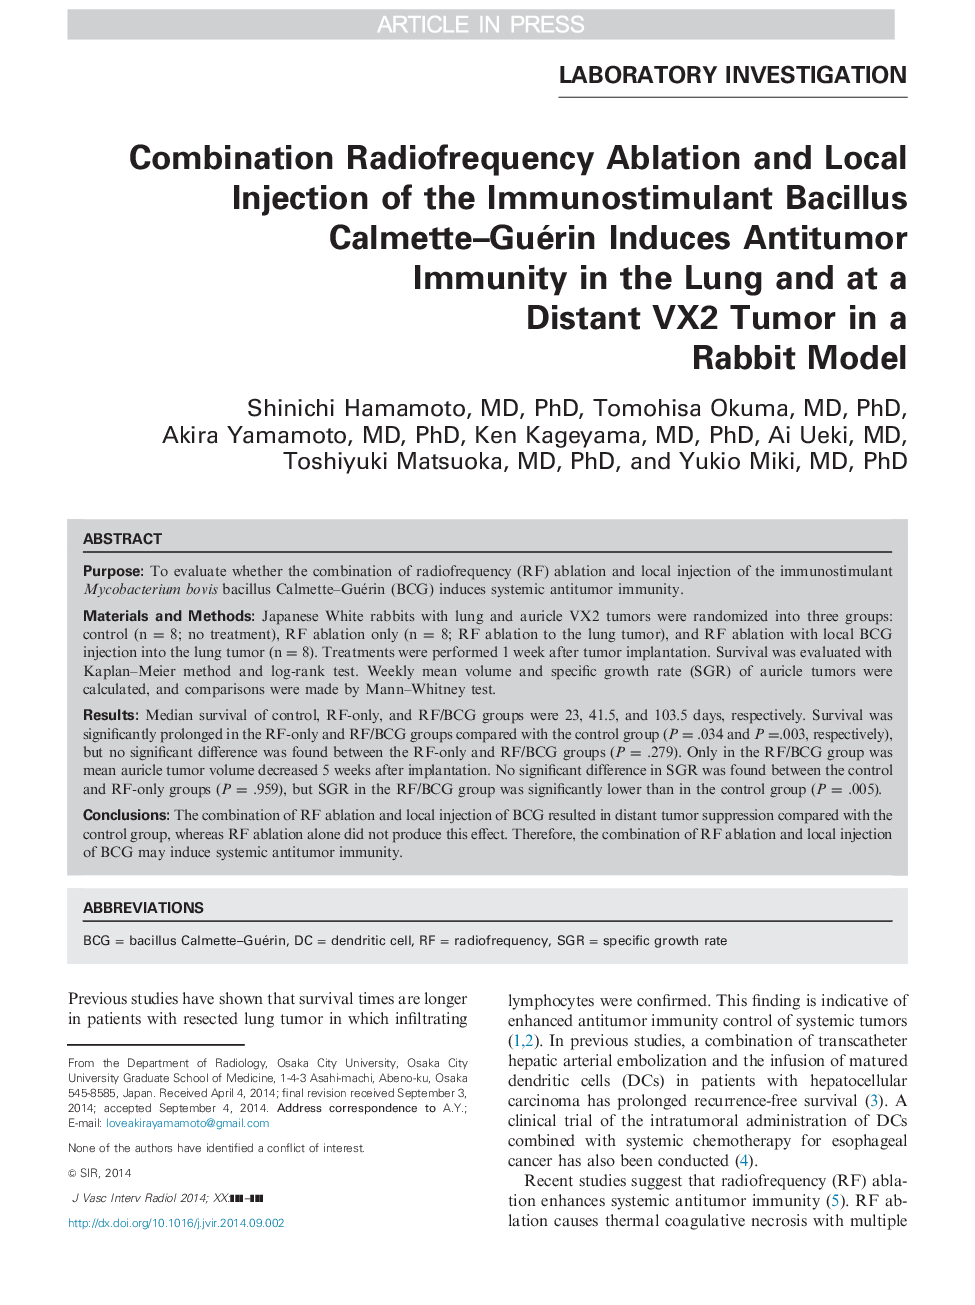 Combination Radiofrequency Ablation and Local Injection of the Immunostimulant Bacillus Calmette-Guérin Induces Antitumor Immunity in the Lung and at a Distant VX2 Tumor in a Rabbit Model